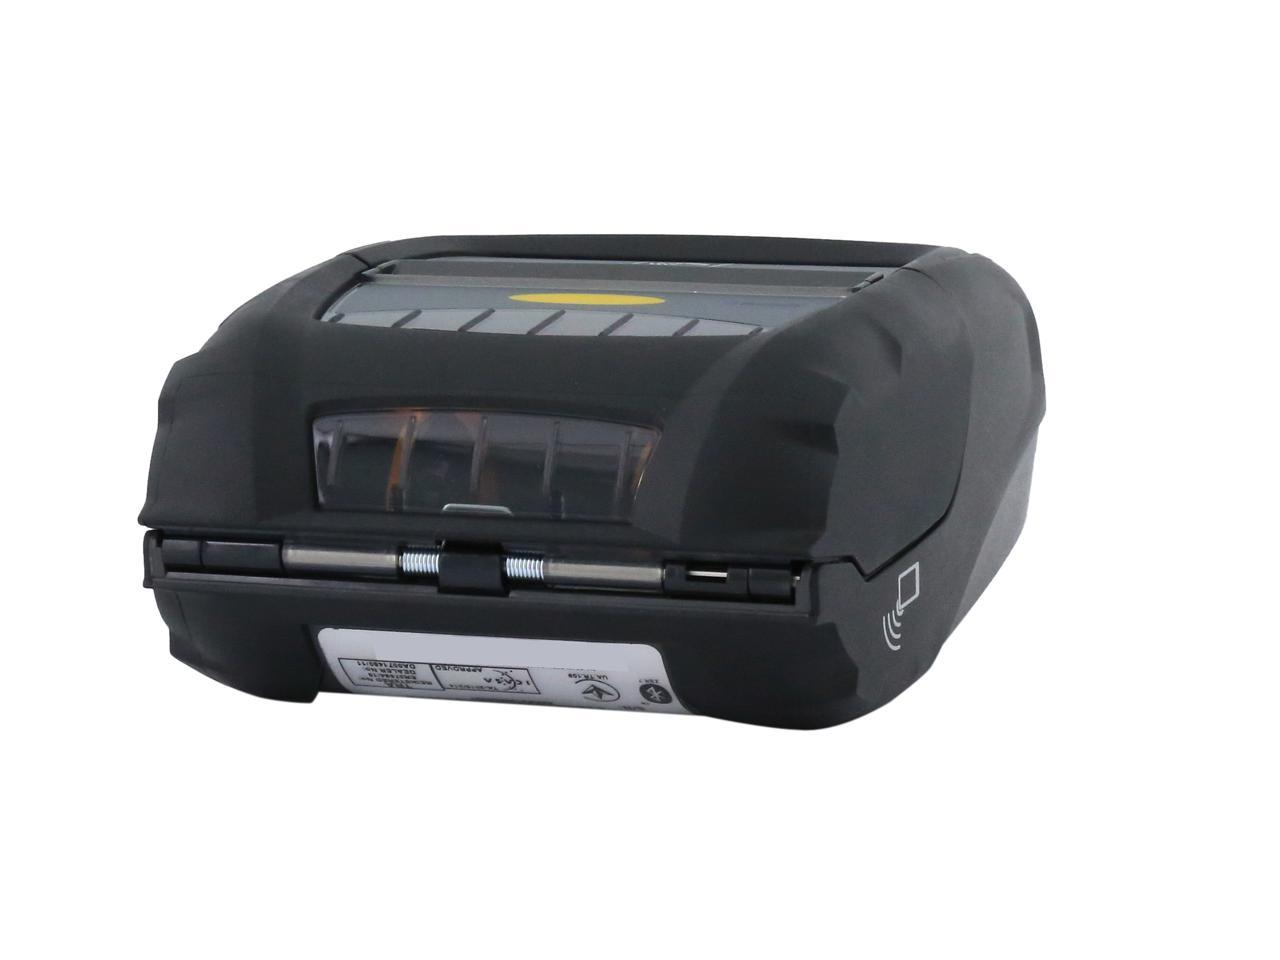 Zebra Zq510 3 Mobile Direct Thermal Receipt And Label Printer 203 Dpi Bluetooth 40 Linered 1076